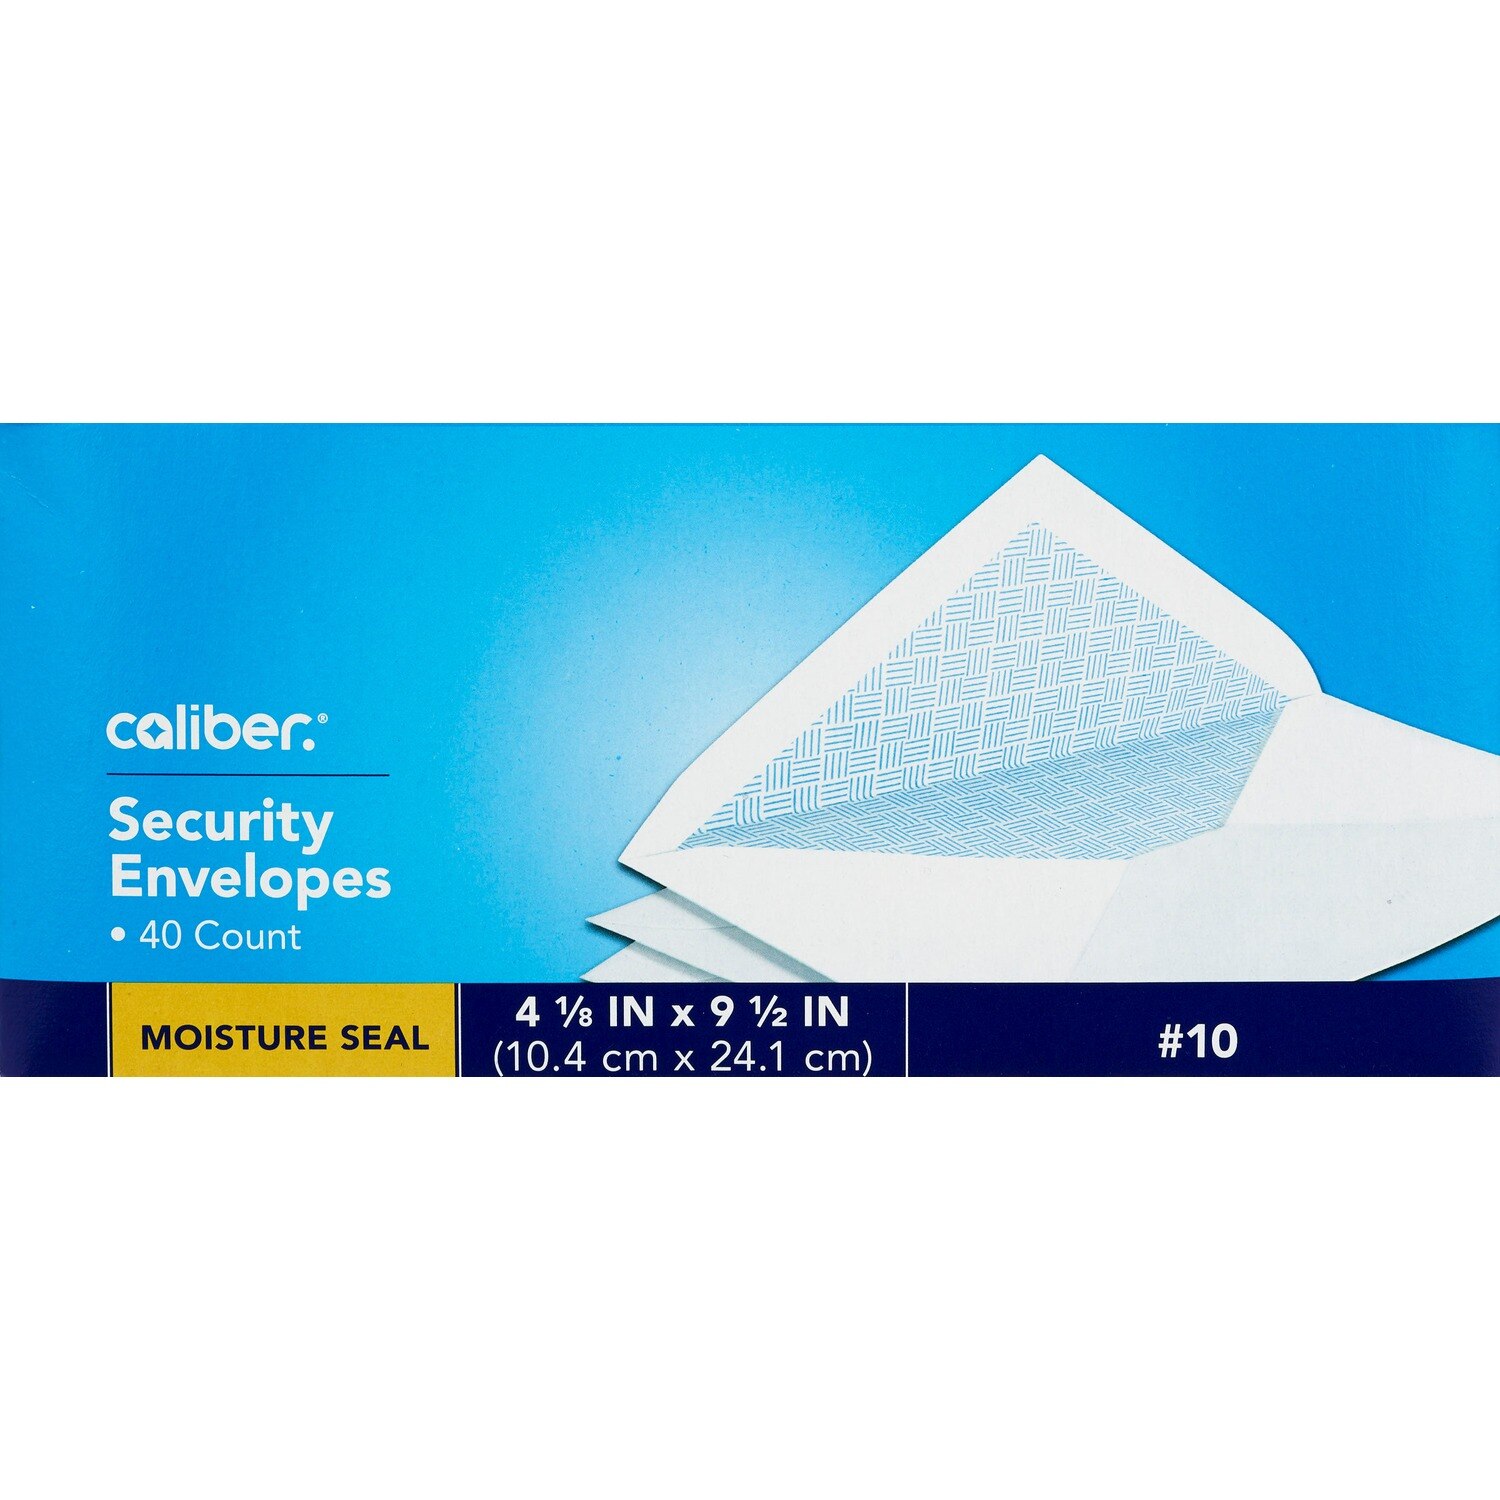 Caliber #10 Moisture Seal Security Envelopes, 4 1/8 in. x 9 1/2 in., 40 CT